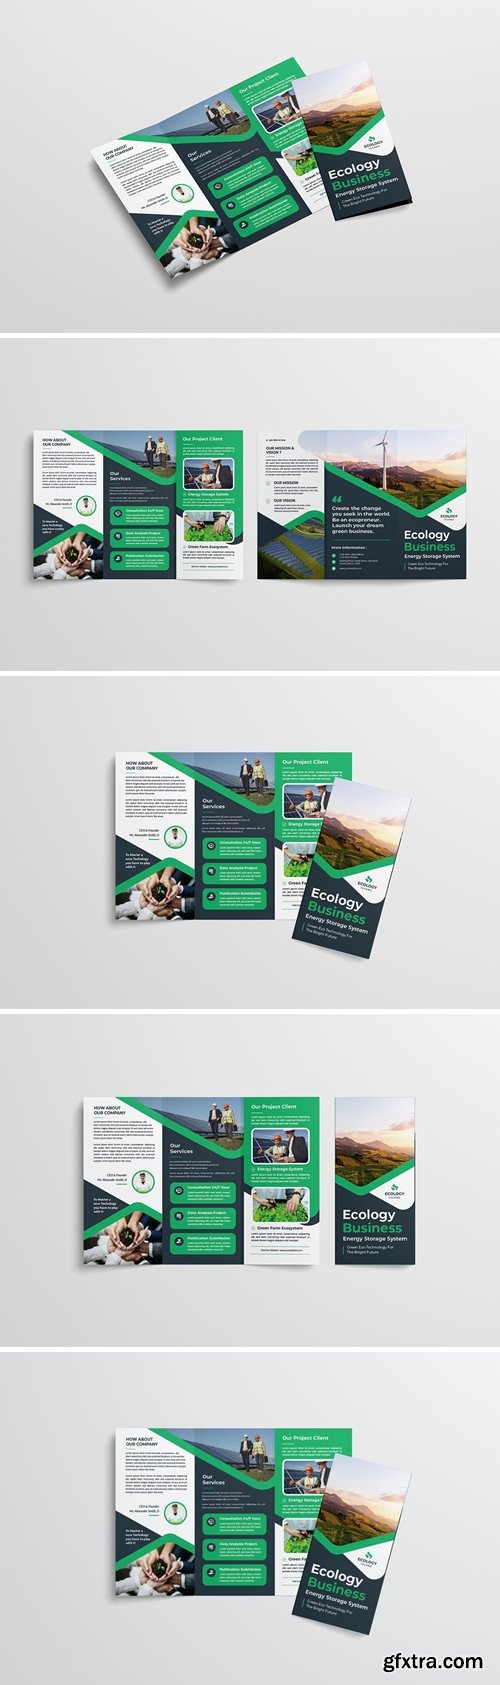 Ecology Business Trifold